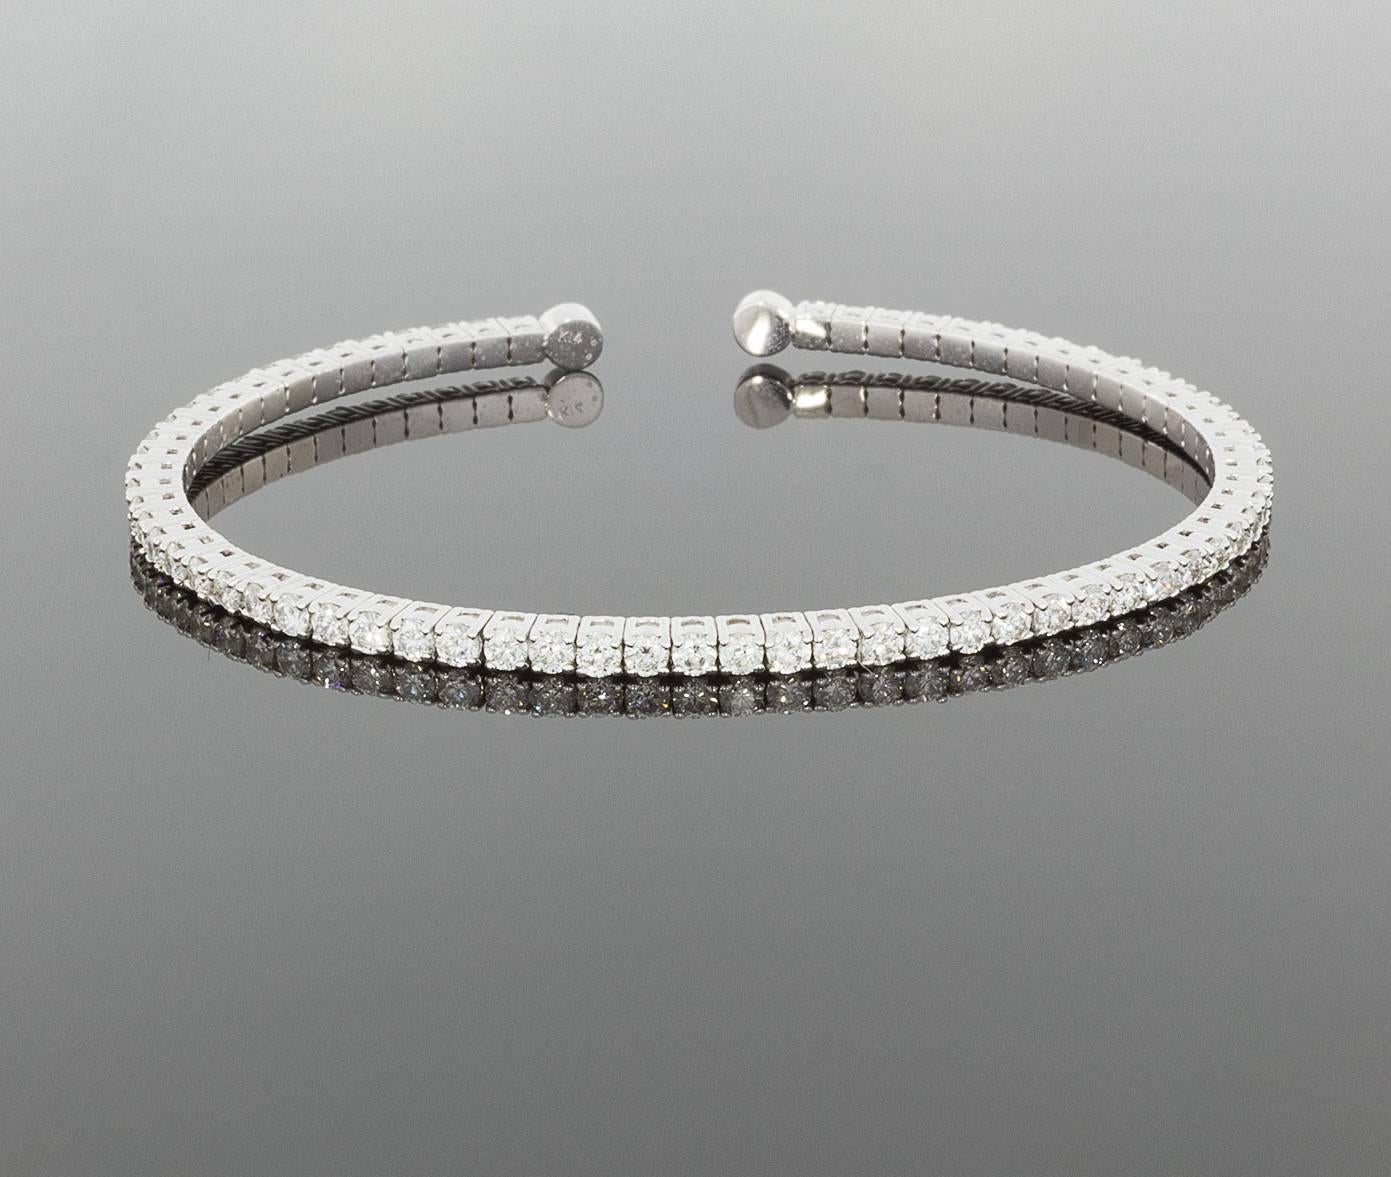 This beautiful diamond bracelet is a wonderfully updated version of the classic tennis bracelet. It is a prong set, flexible bangle bracelet, featuring 2.99 carats total weight in sparkly round diamonds. The bracelet is comprised of 14 karat white